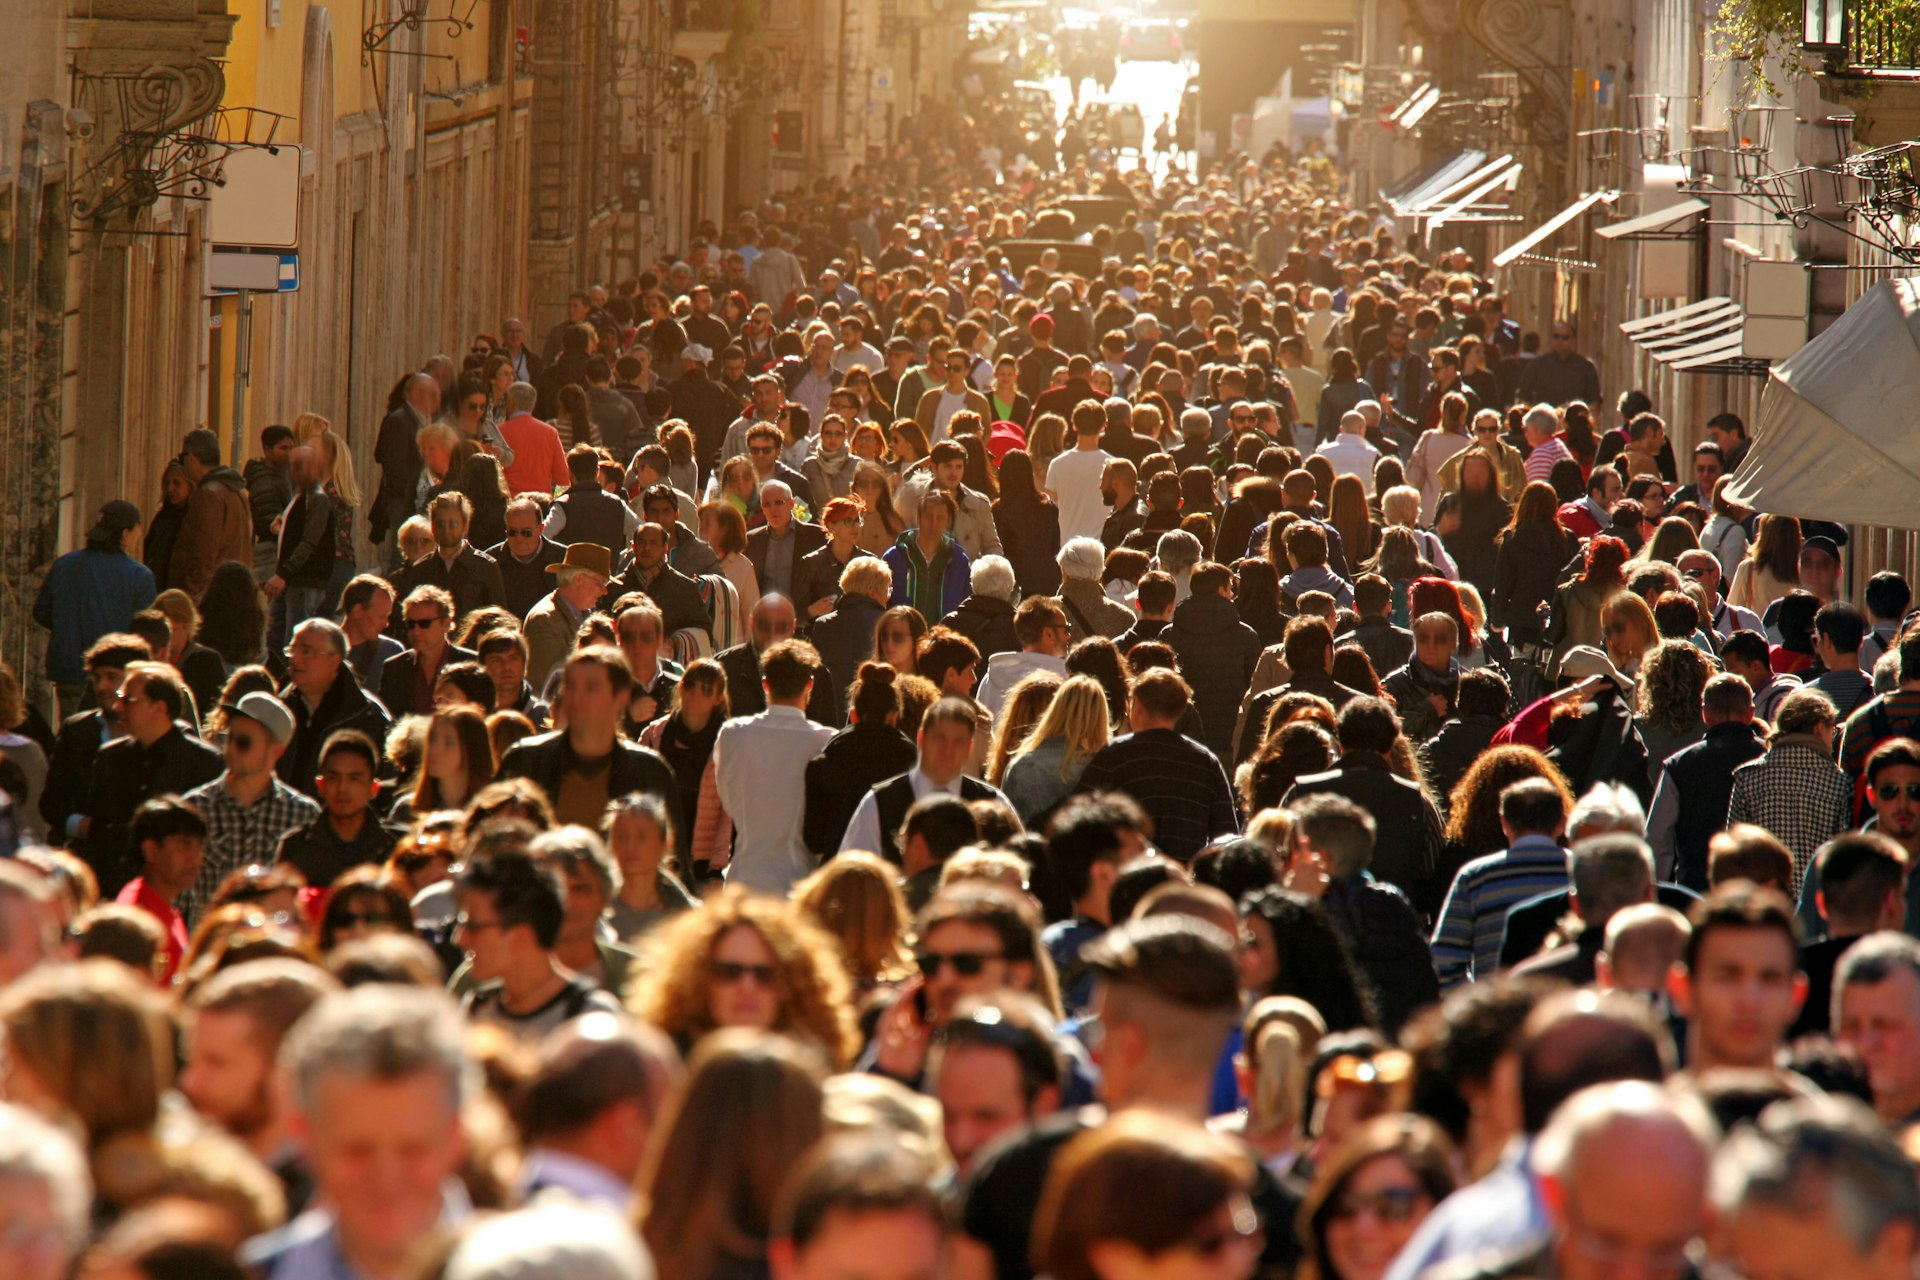 A large group of people crowding Rome's downtown streets in a sunny day.